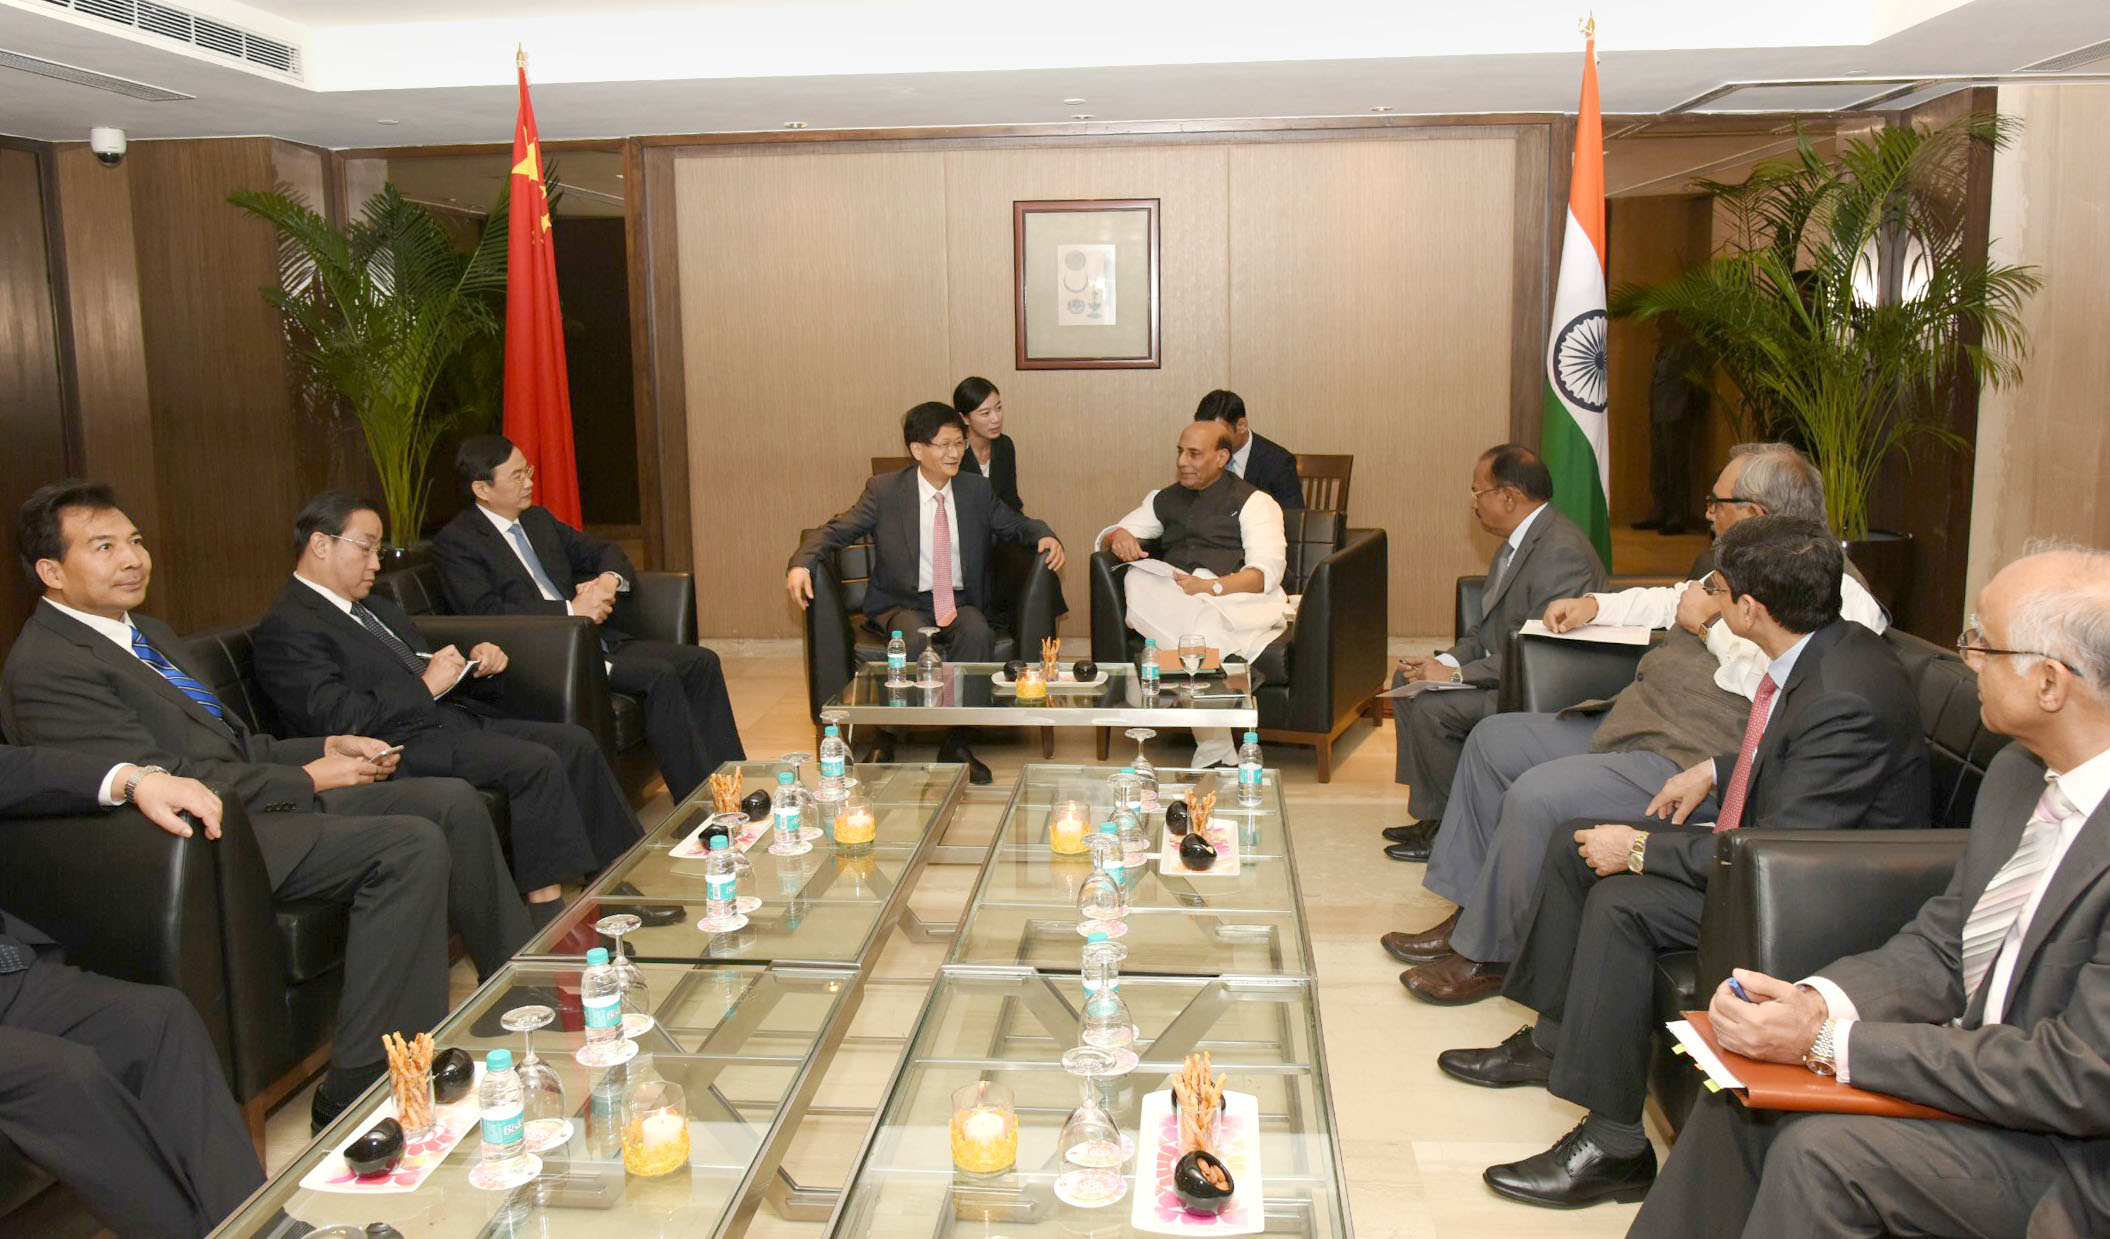 A Chinese delegation led by the Special Envoy of the Chinese President and Member of the Political Bureau of the Central Committee of the Communist Party of China, Mr. Meng Jianzhu meeting the Indian delegation led by the Union Home Minister, Shri Rajnath Singh in New Delhi on November 08, 2016.